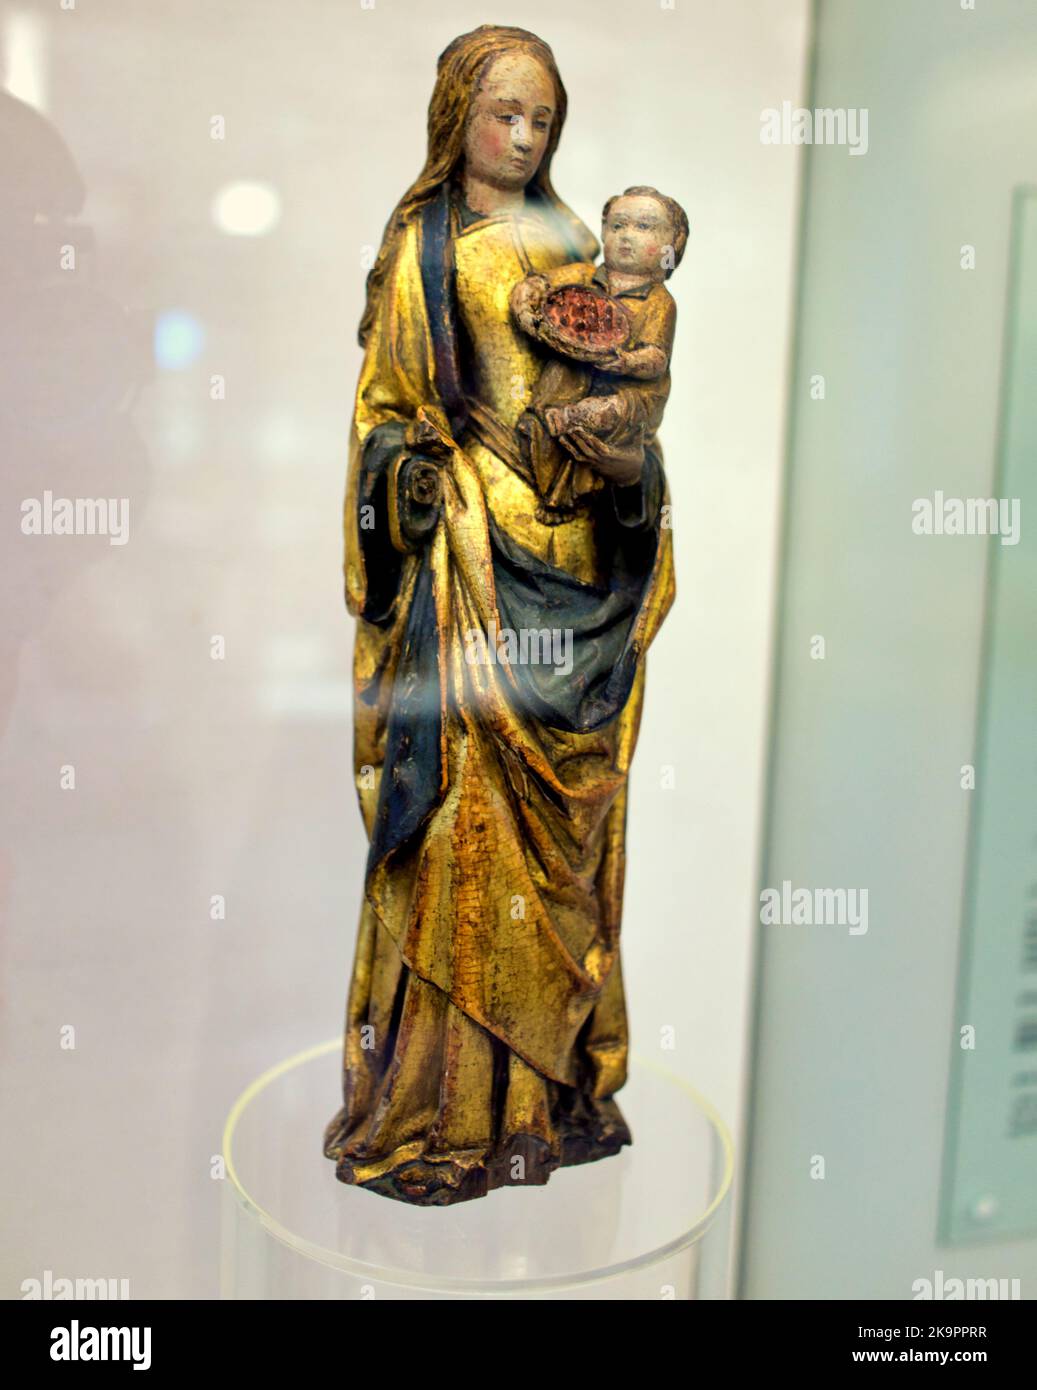 St. Mungo Museum Of Religious Life & Art Madonna and child Stock Photo